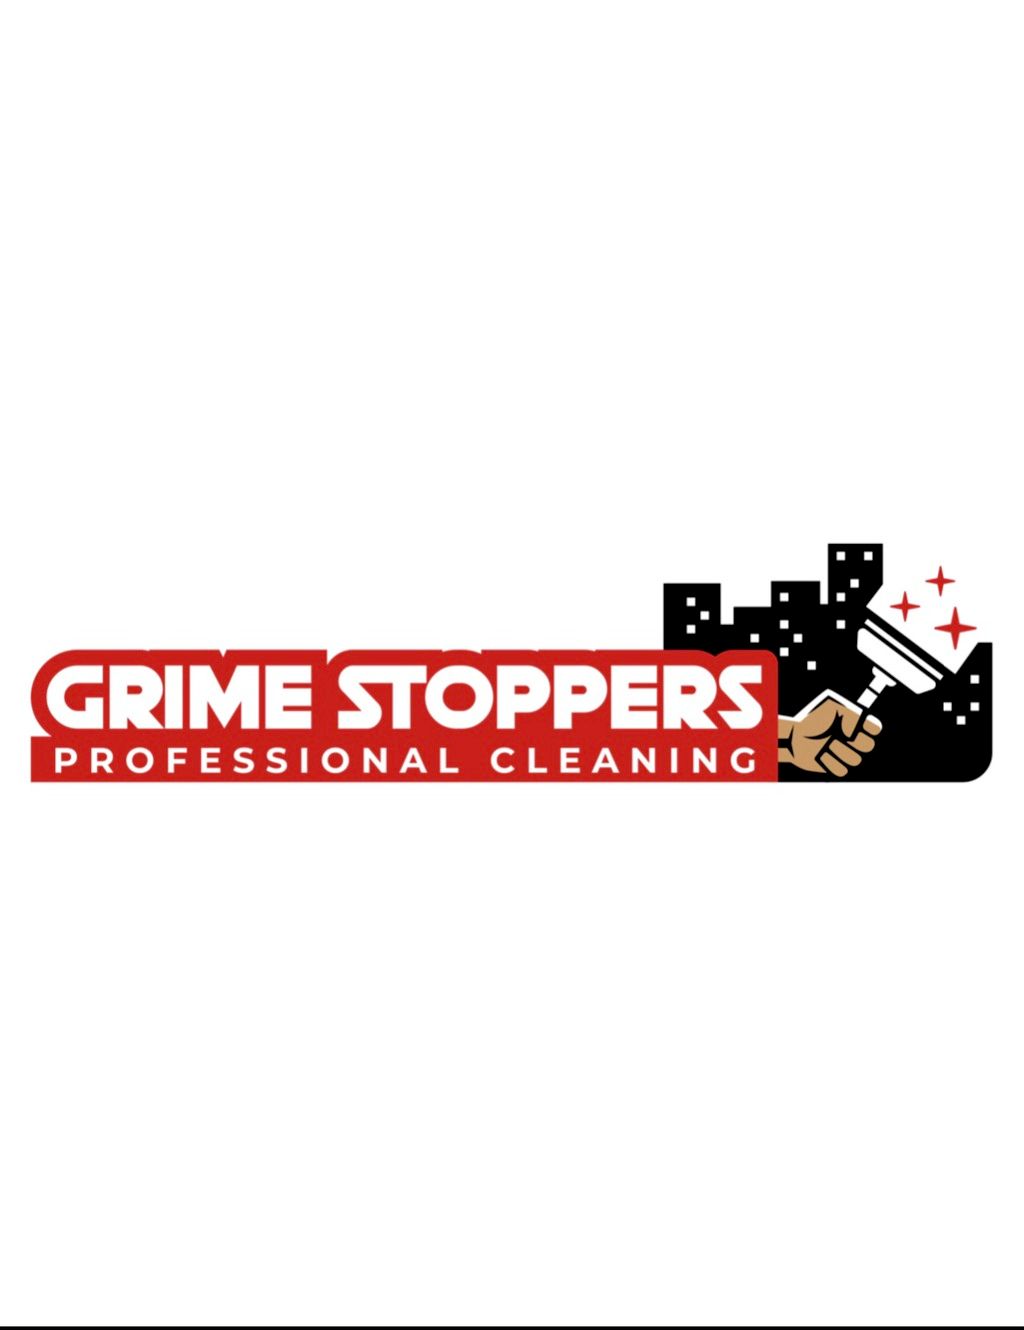 Grime stoppers professional cleaning